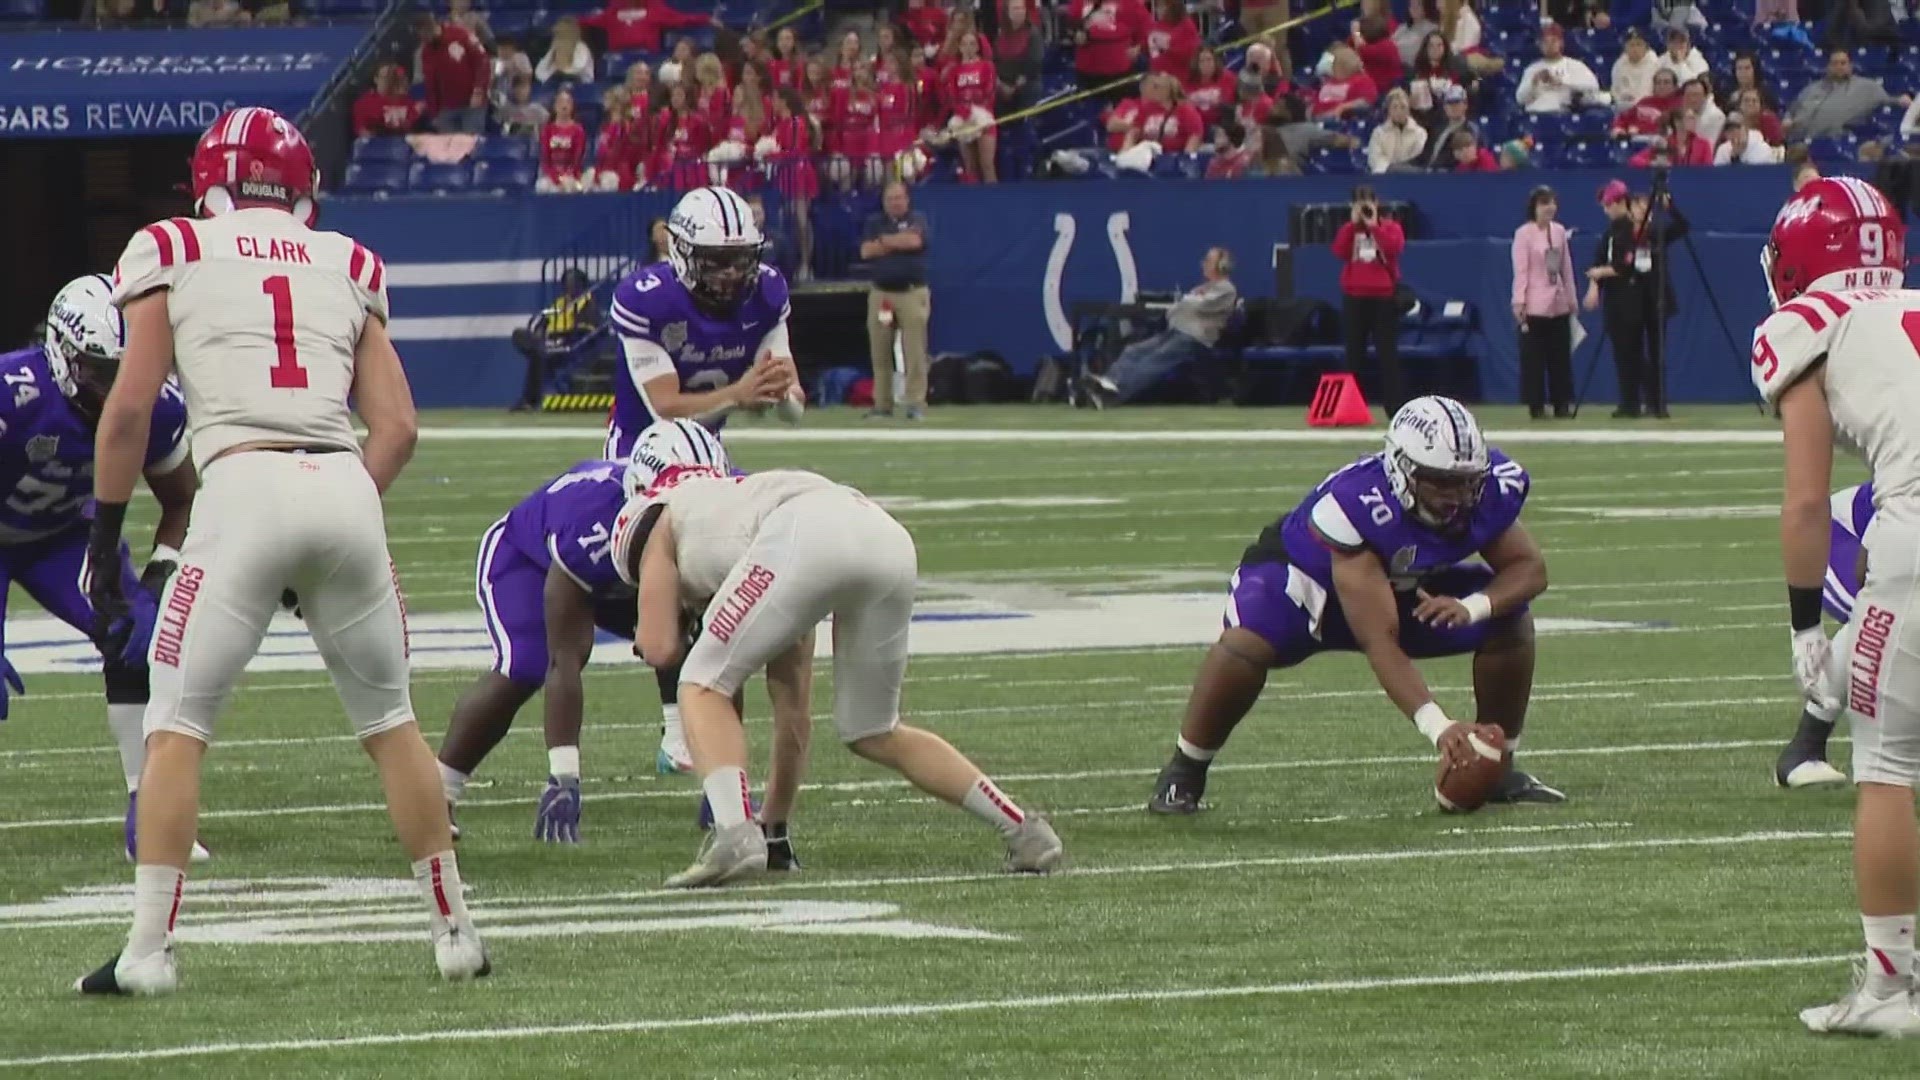 13Sports reporter Dominic Miranda recaps the Indiana high school football Class 6A state championship game between Ben Davis and Crown Point.